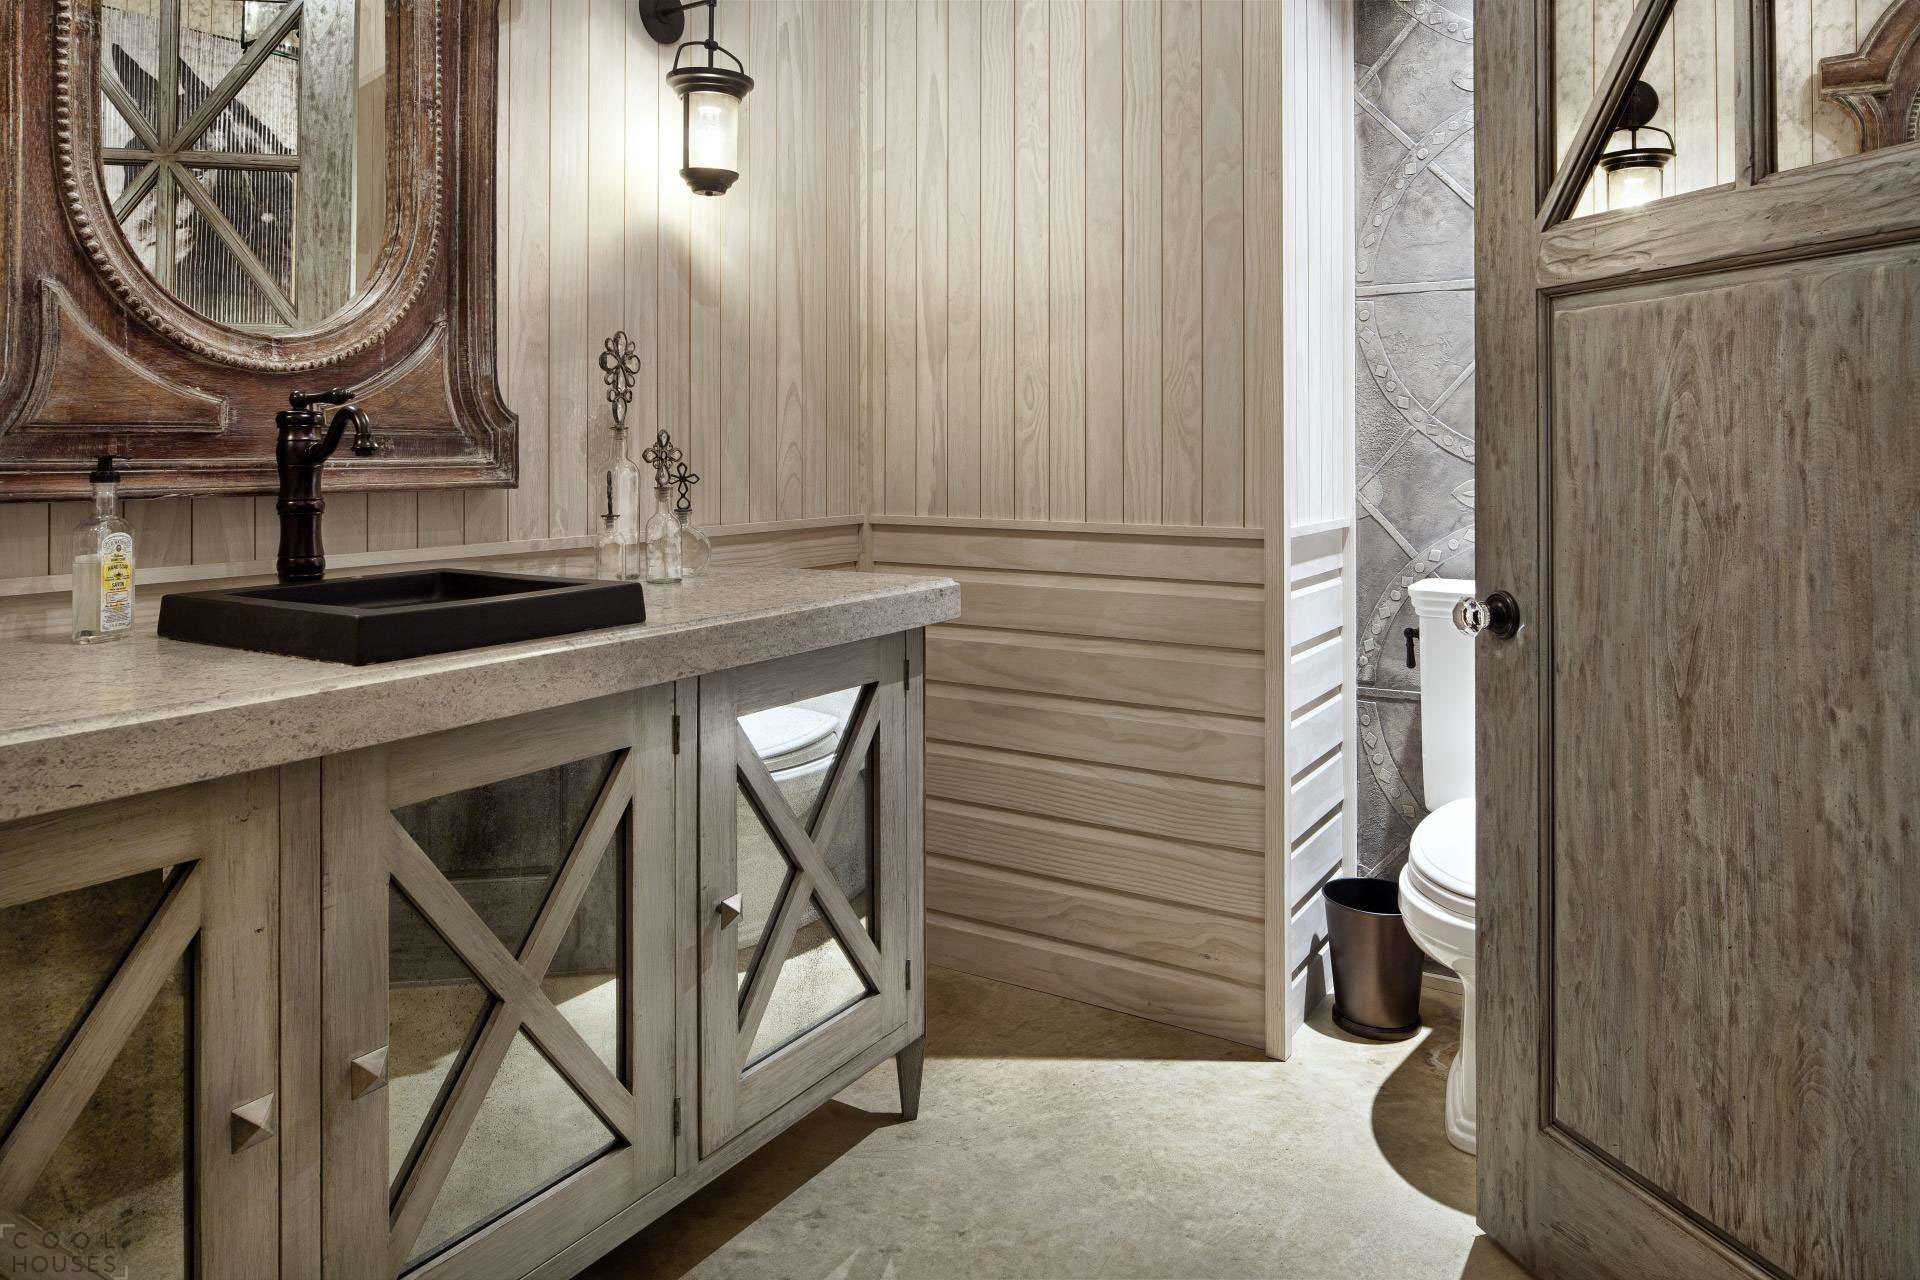 version of the modern bathroom interior in a wooden house